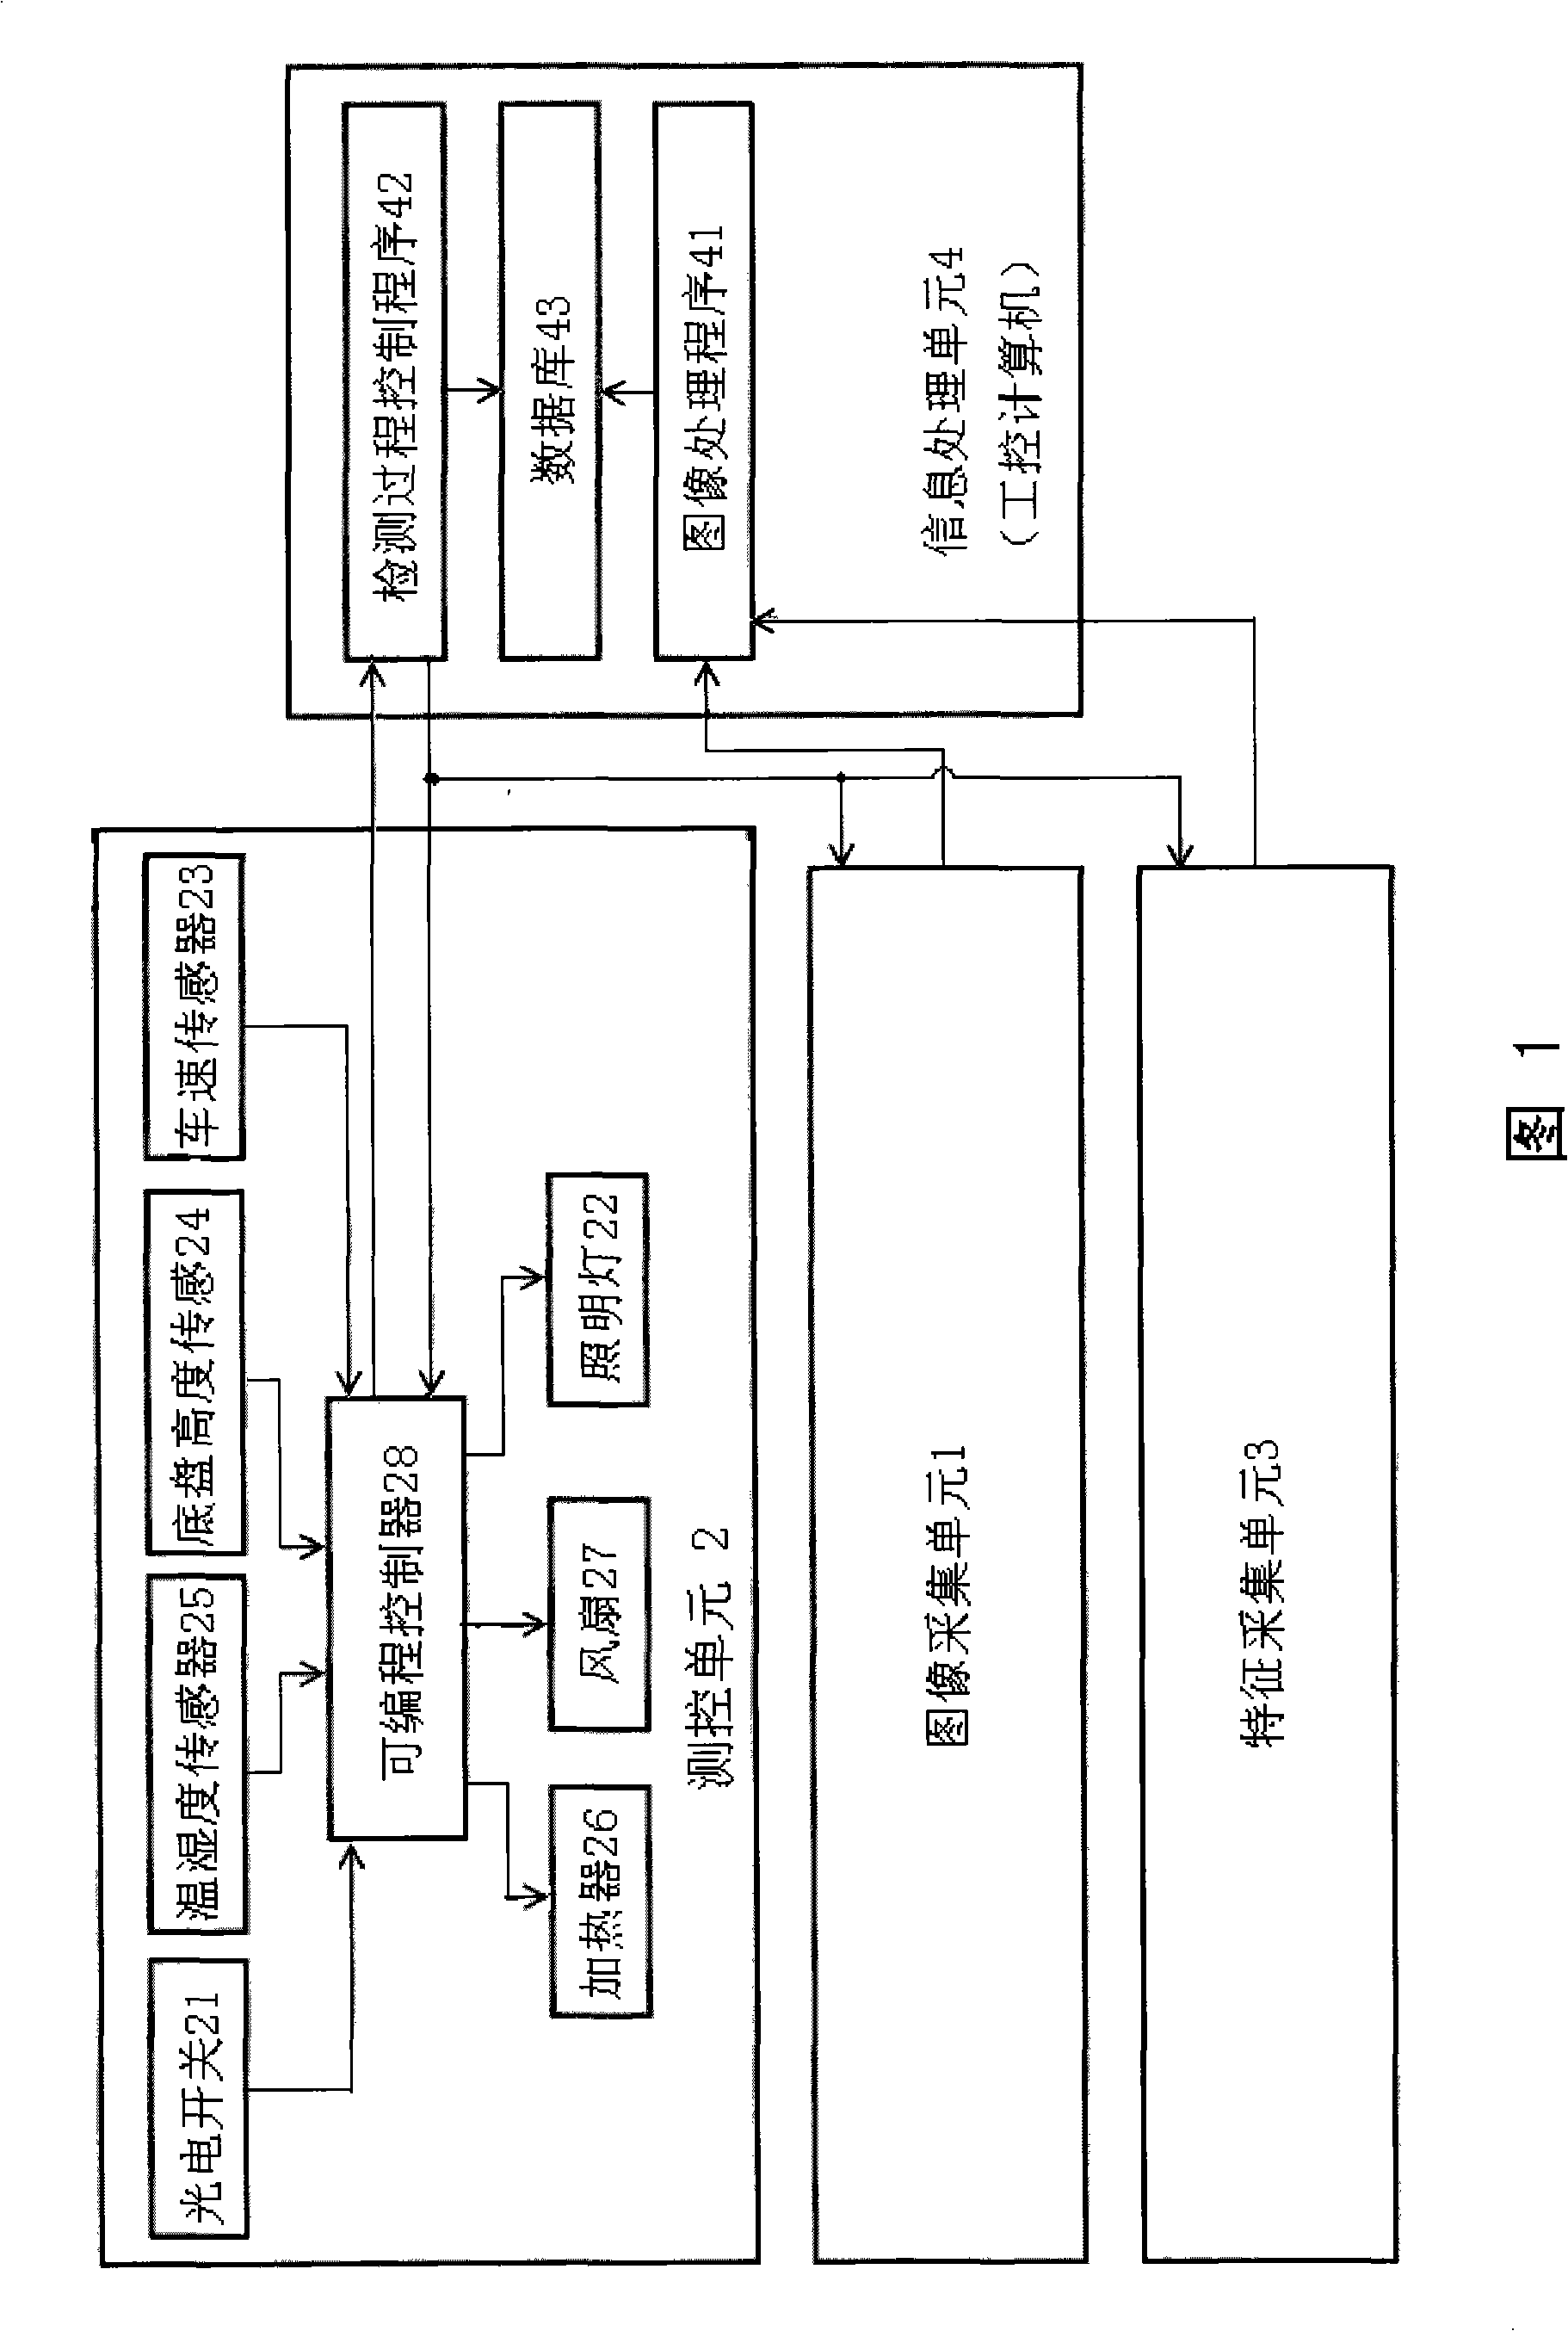 System and method for safe detecting chassis of automobile